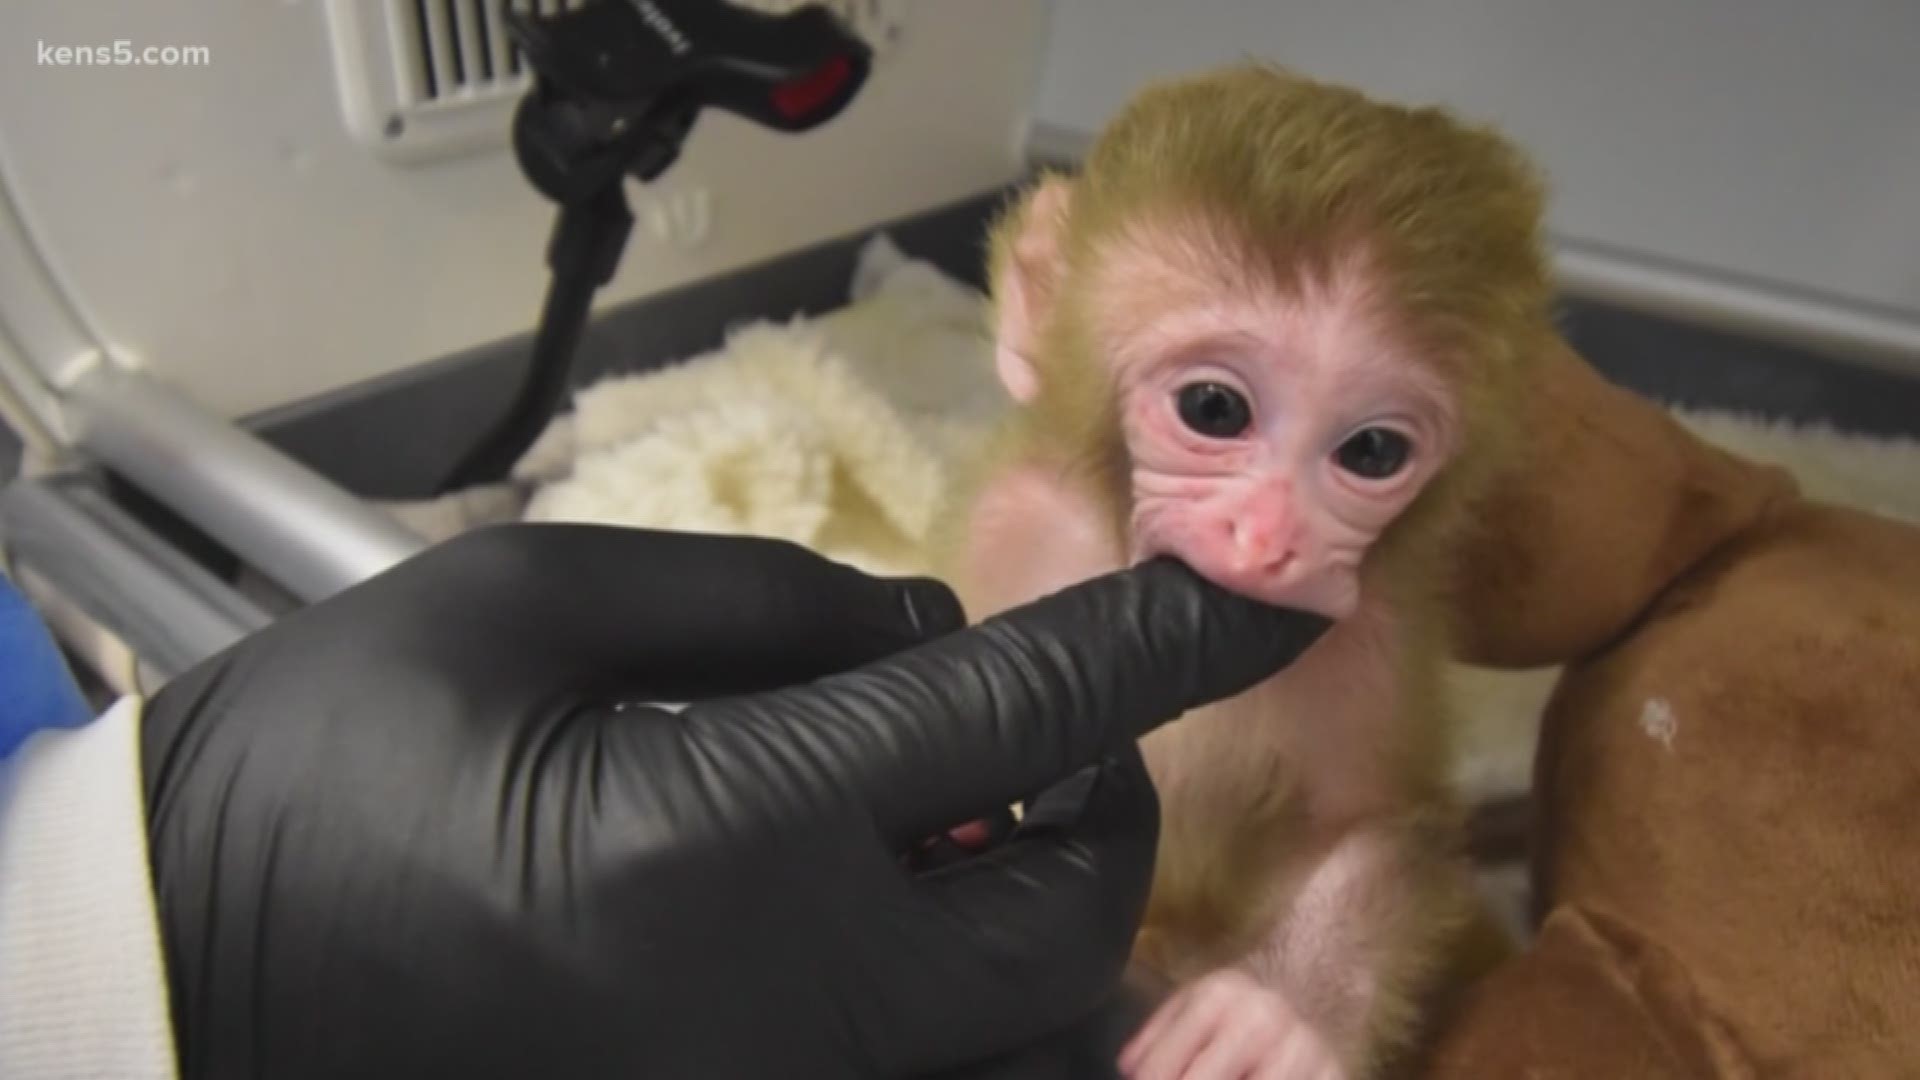 Researchers at Texas Biomed had to build nurseries for newborn macaques they say could help them eradicate infectious diseases such as tuberculosis.